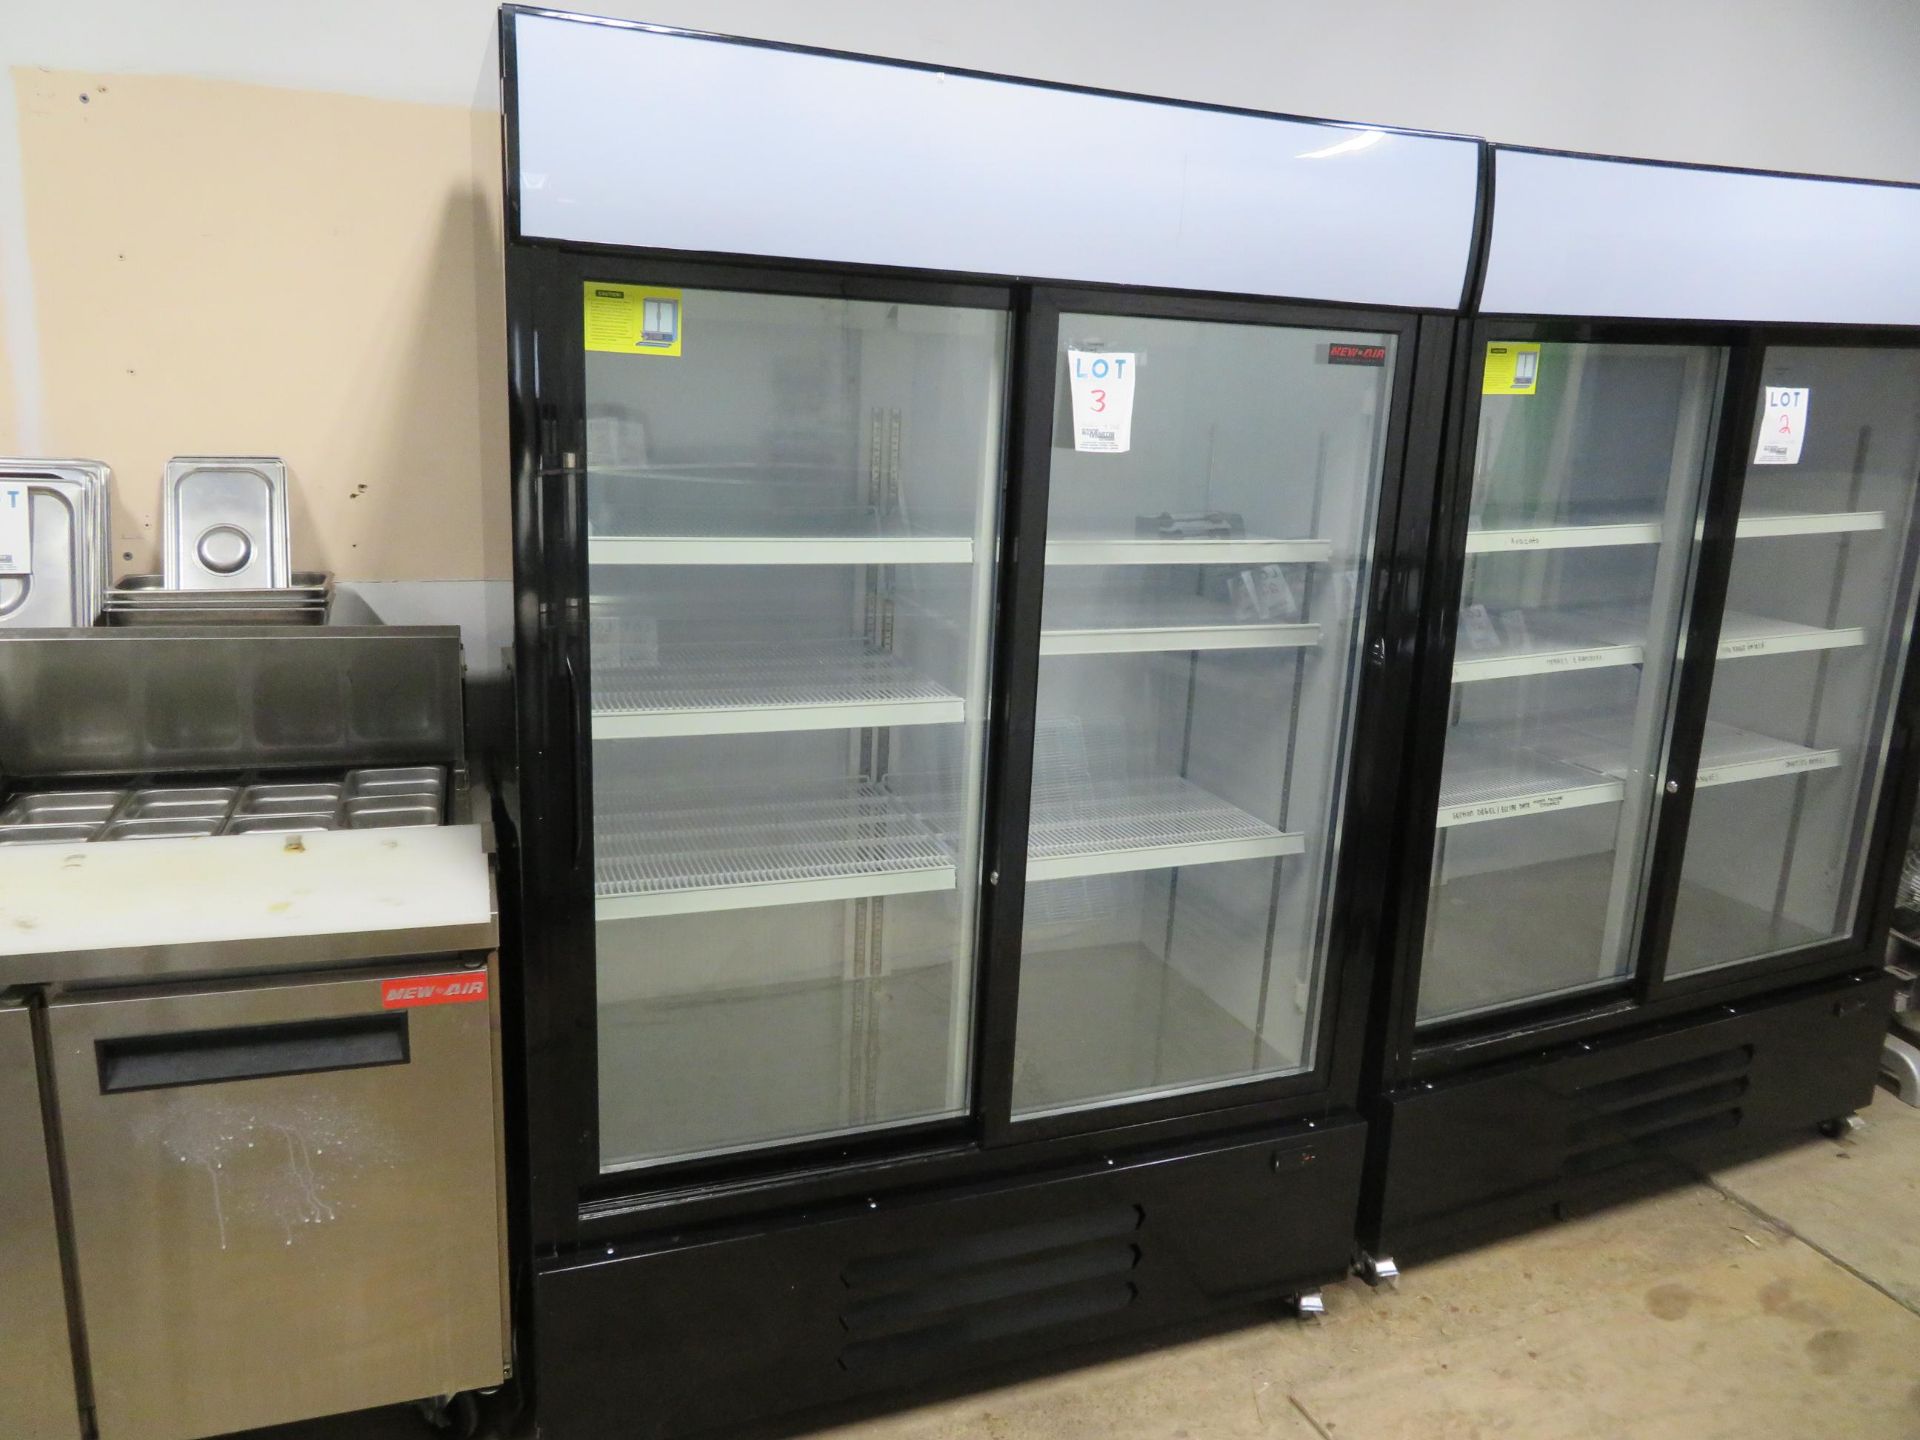 NEW AIR 2 door glass upright refrigerator on wheels, Mod # NGR-115S, approx. 54"w x 29"d x 78"h - Image 2 of 4